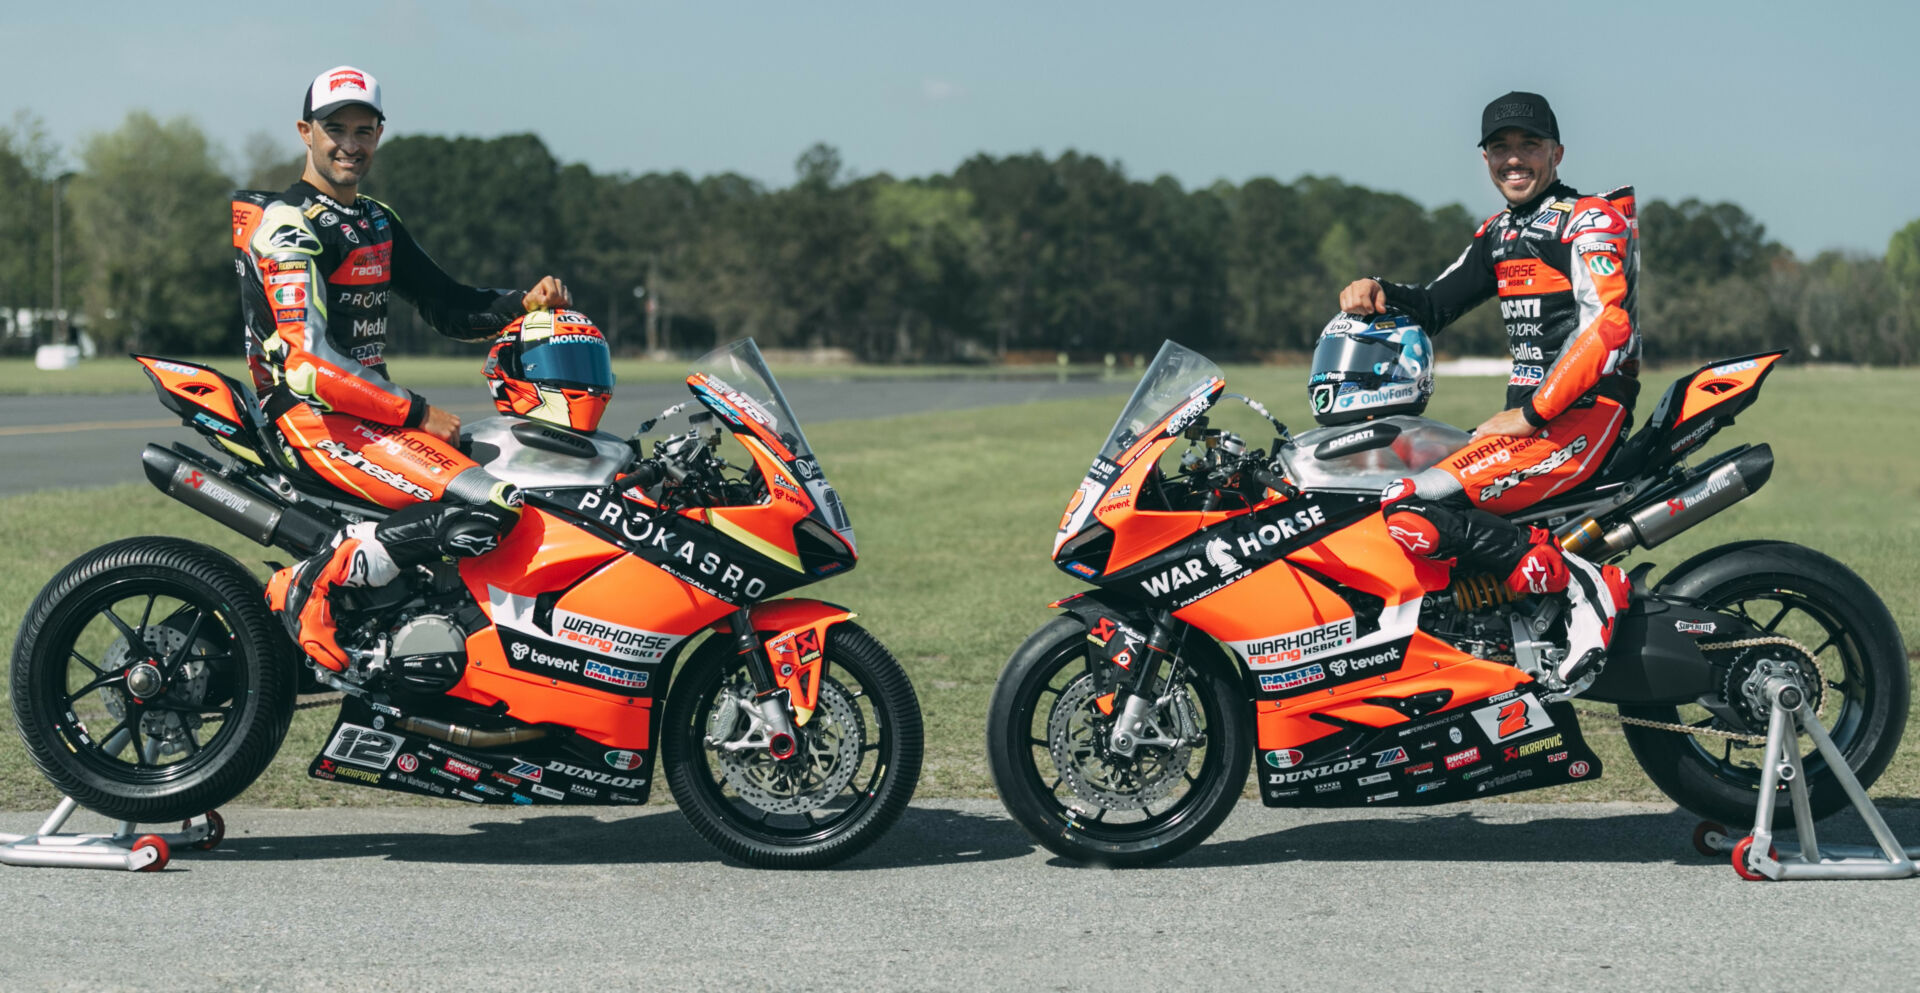 Xavi Fores (left) and Josh Herrin (right) and their Ducati Panigale V2 racebikes. Photo courtesy Ducati.